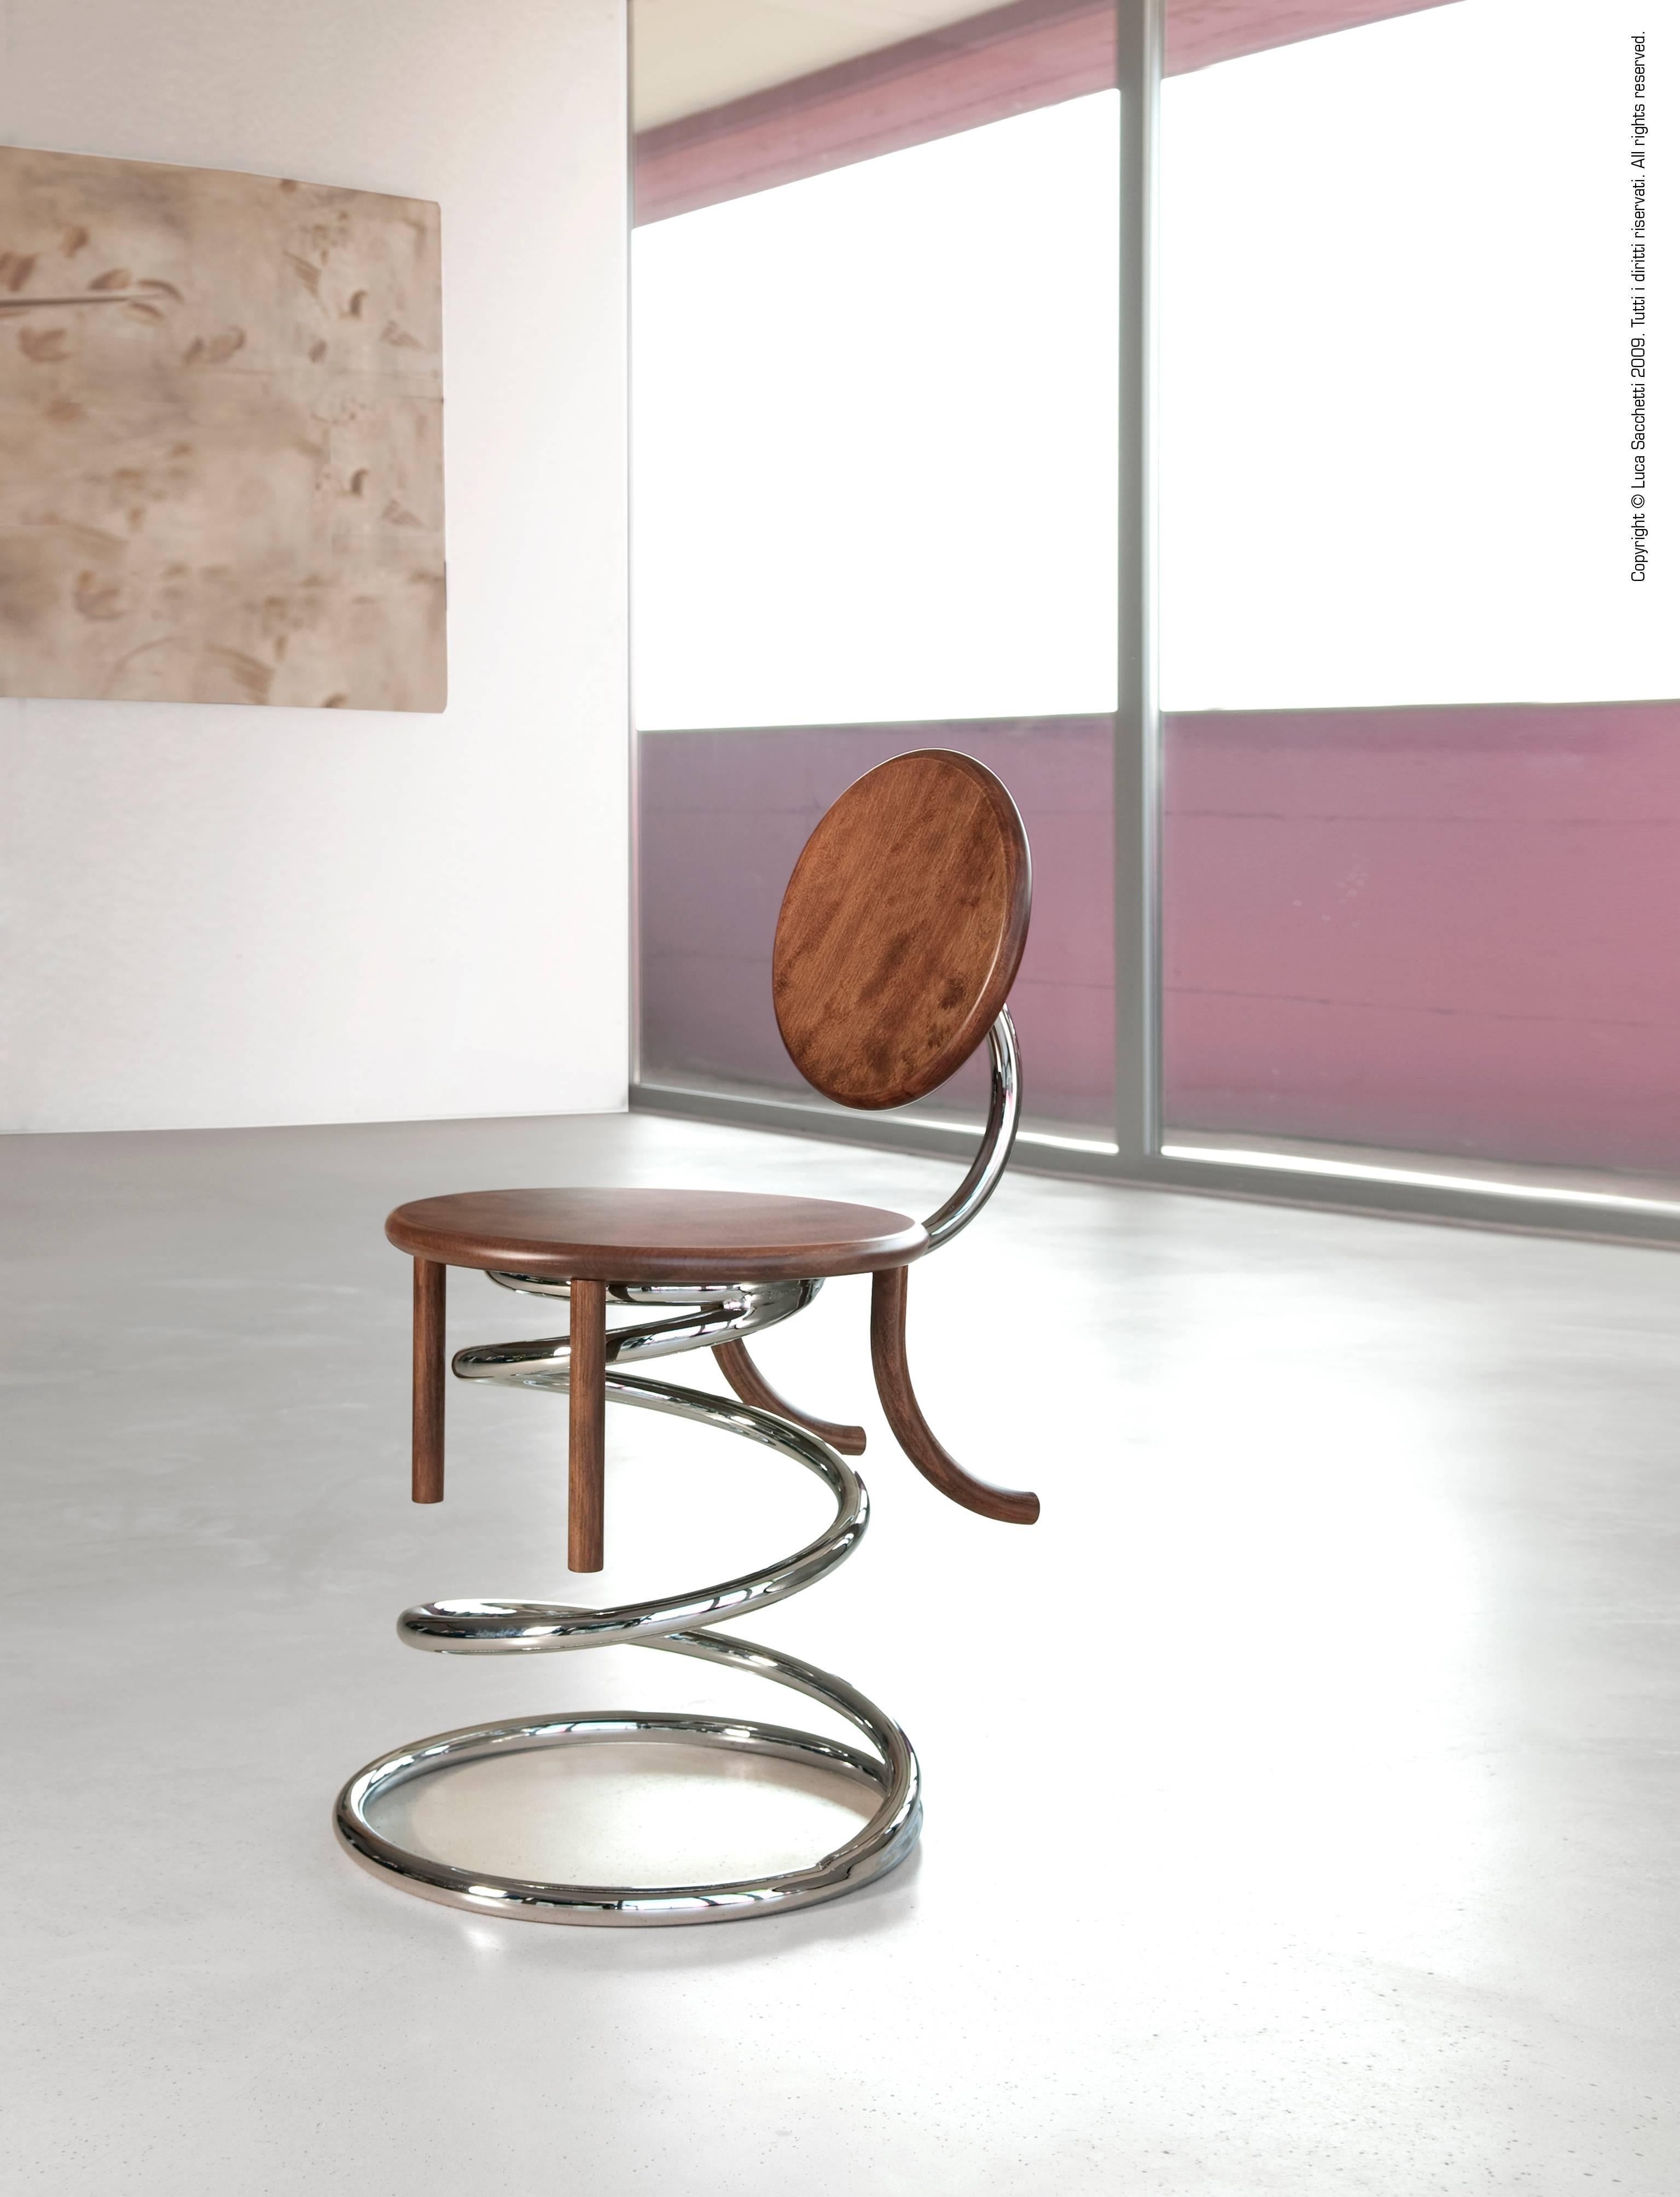 Sedia in libertà consists of a seat and a backrest made of 2 cm (0.8 in) thick solid beech wood with a diameter of 40 cm (15.7 in) and 30 cm (11.8 in) respectively. The seat, at 40 cm (15.7 in) from the ground, has four solid beech wood legs